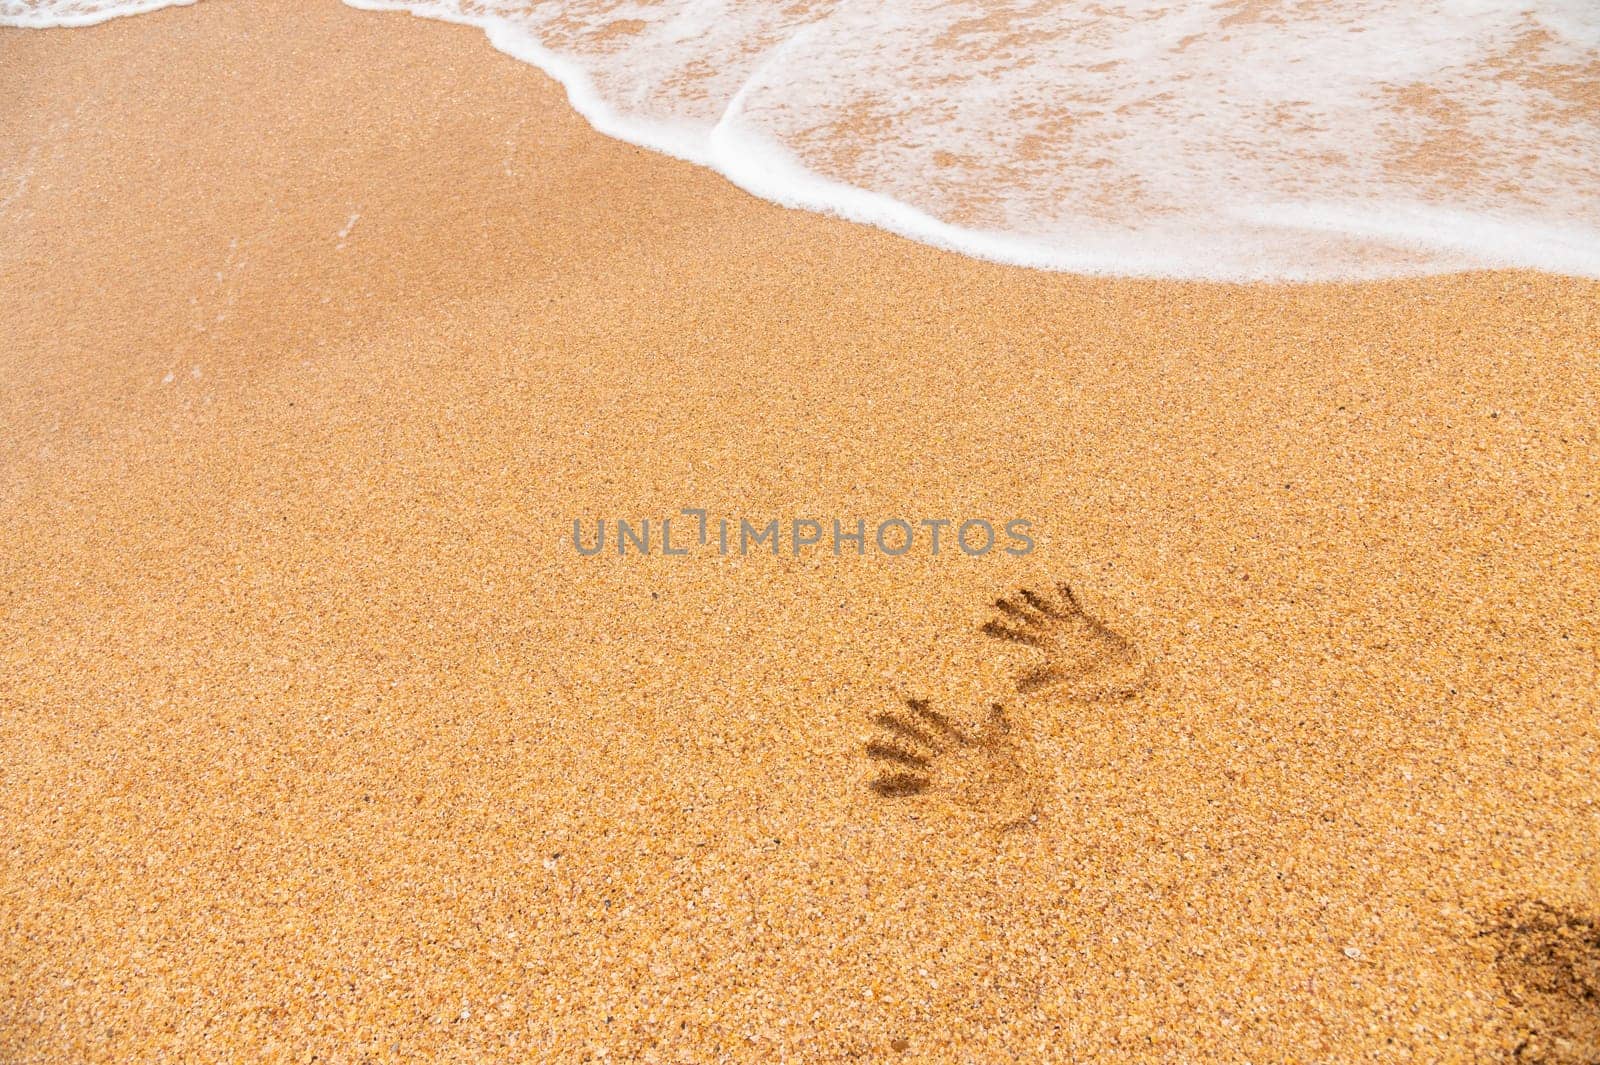 human traces of two hand prints on a sandy beach without people, sea waves rolling in from the side.